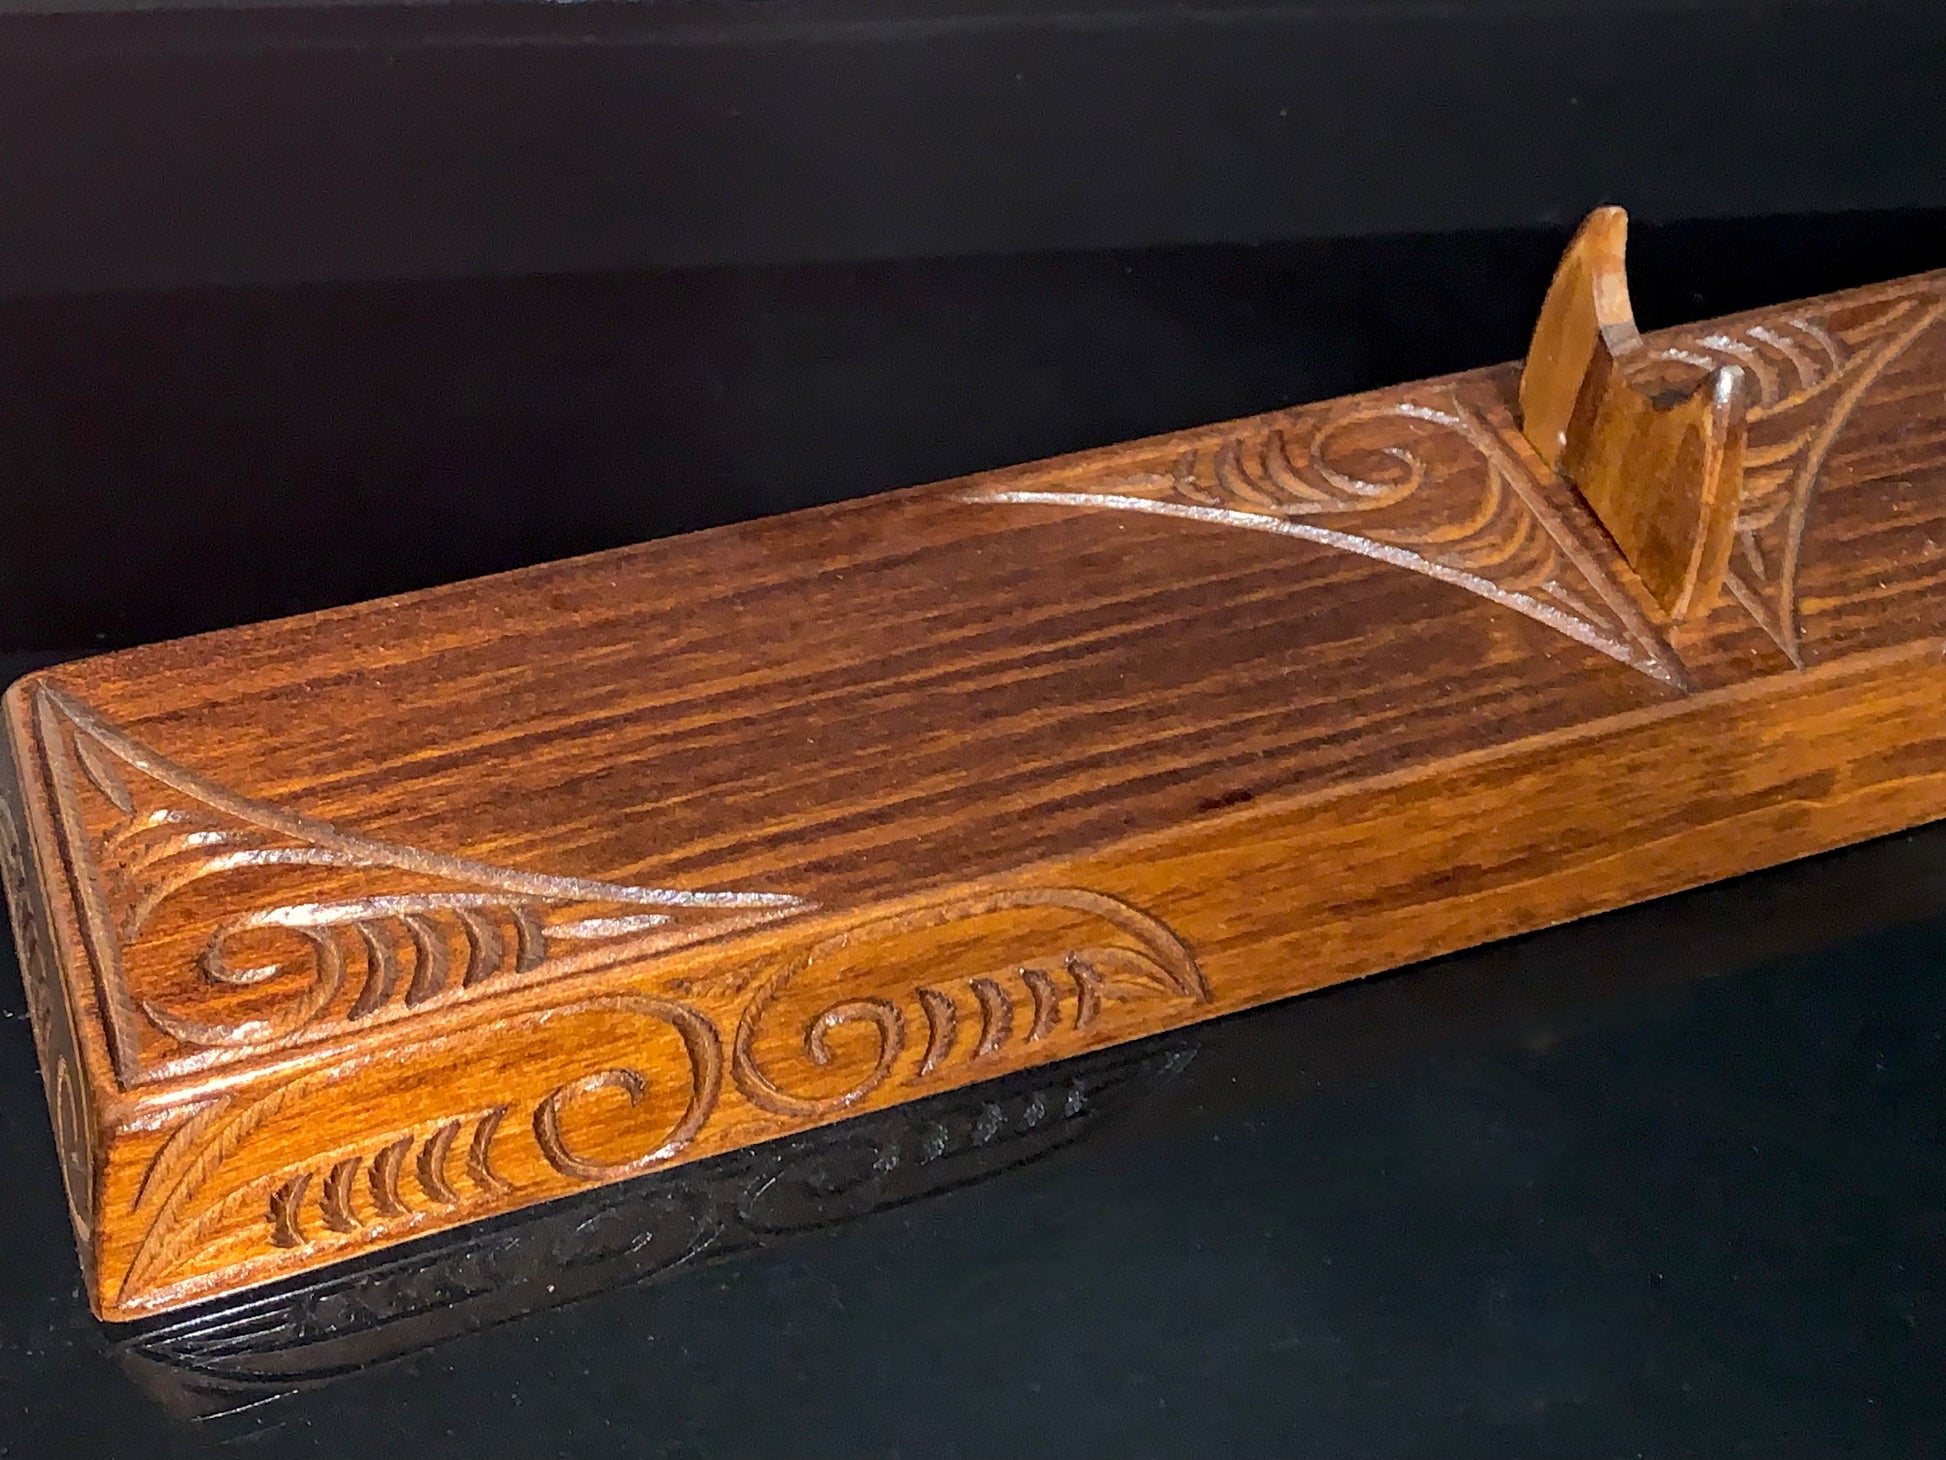 base of  taiaha weapon carved in New Zealand and available from Silver Fern Gallery